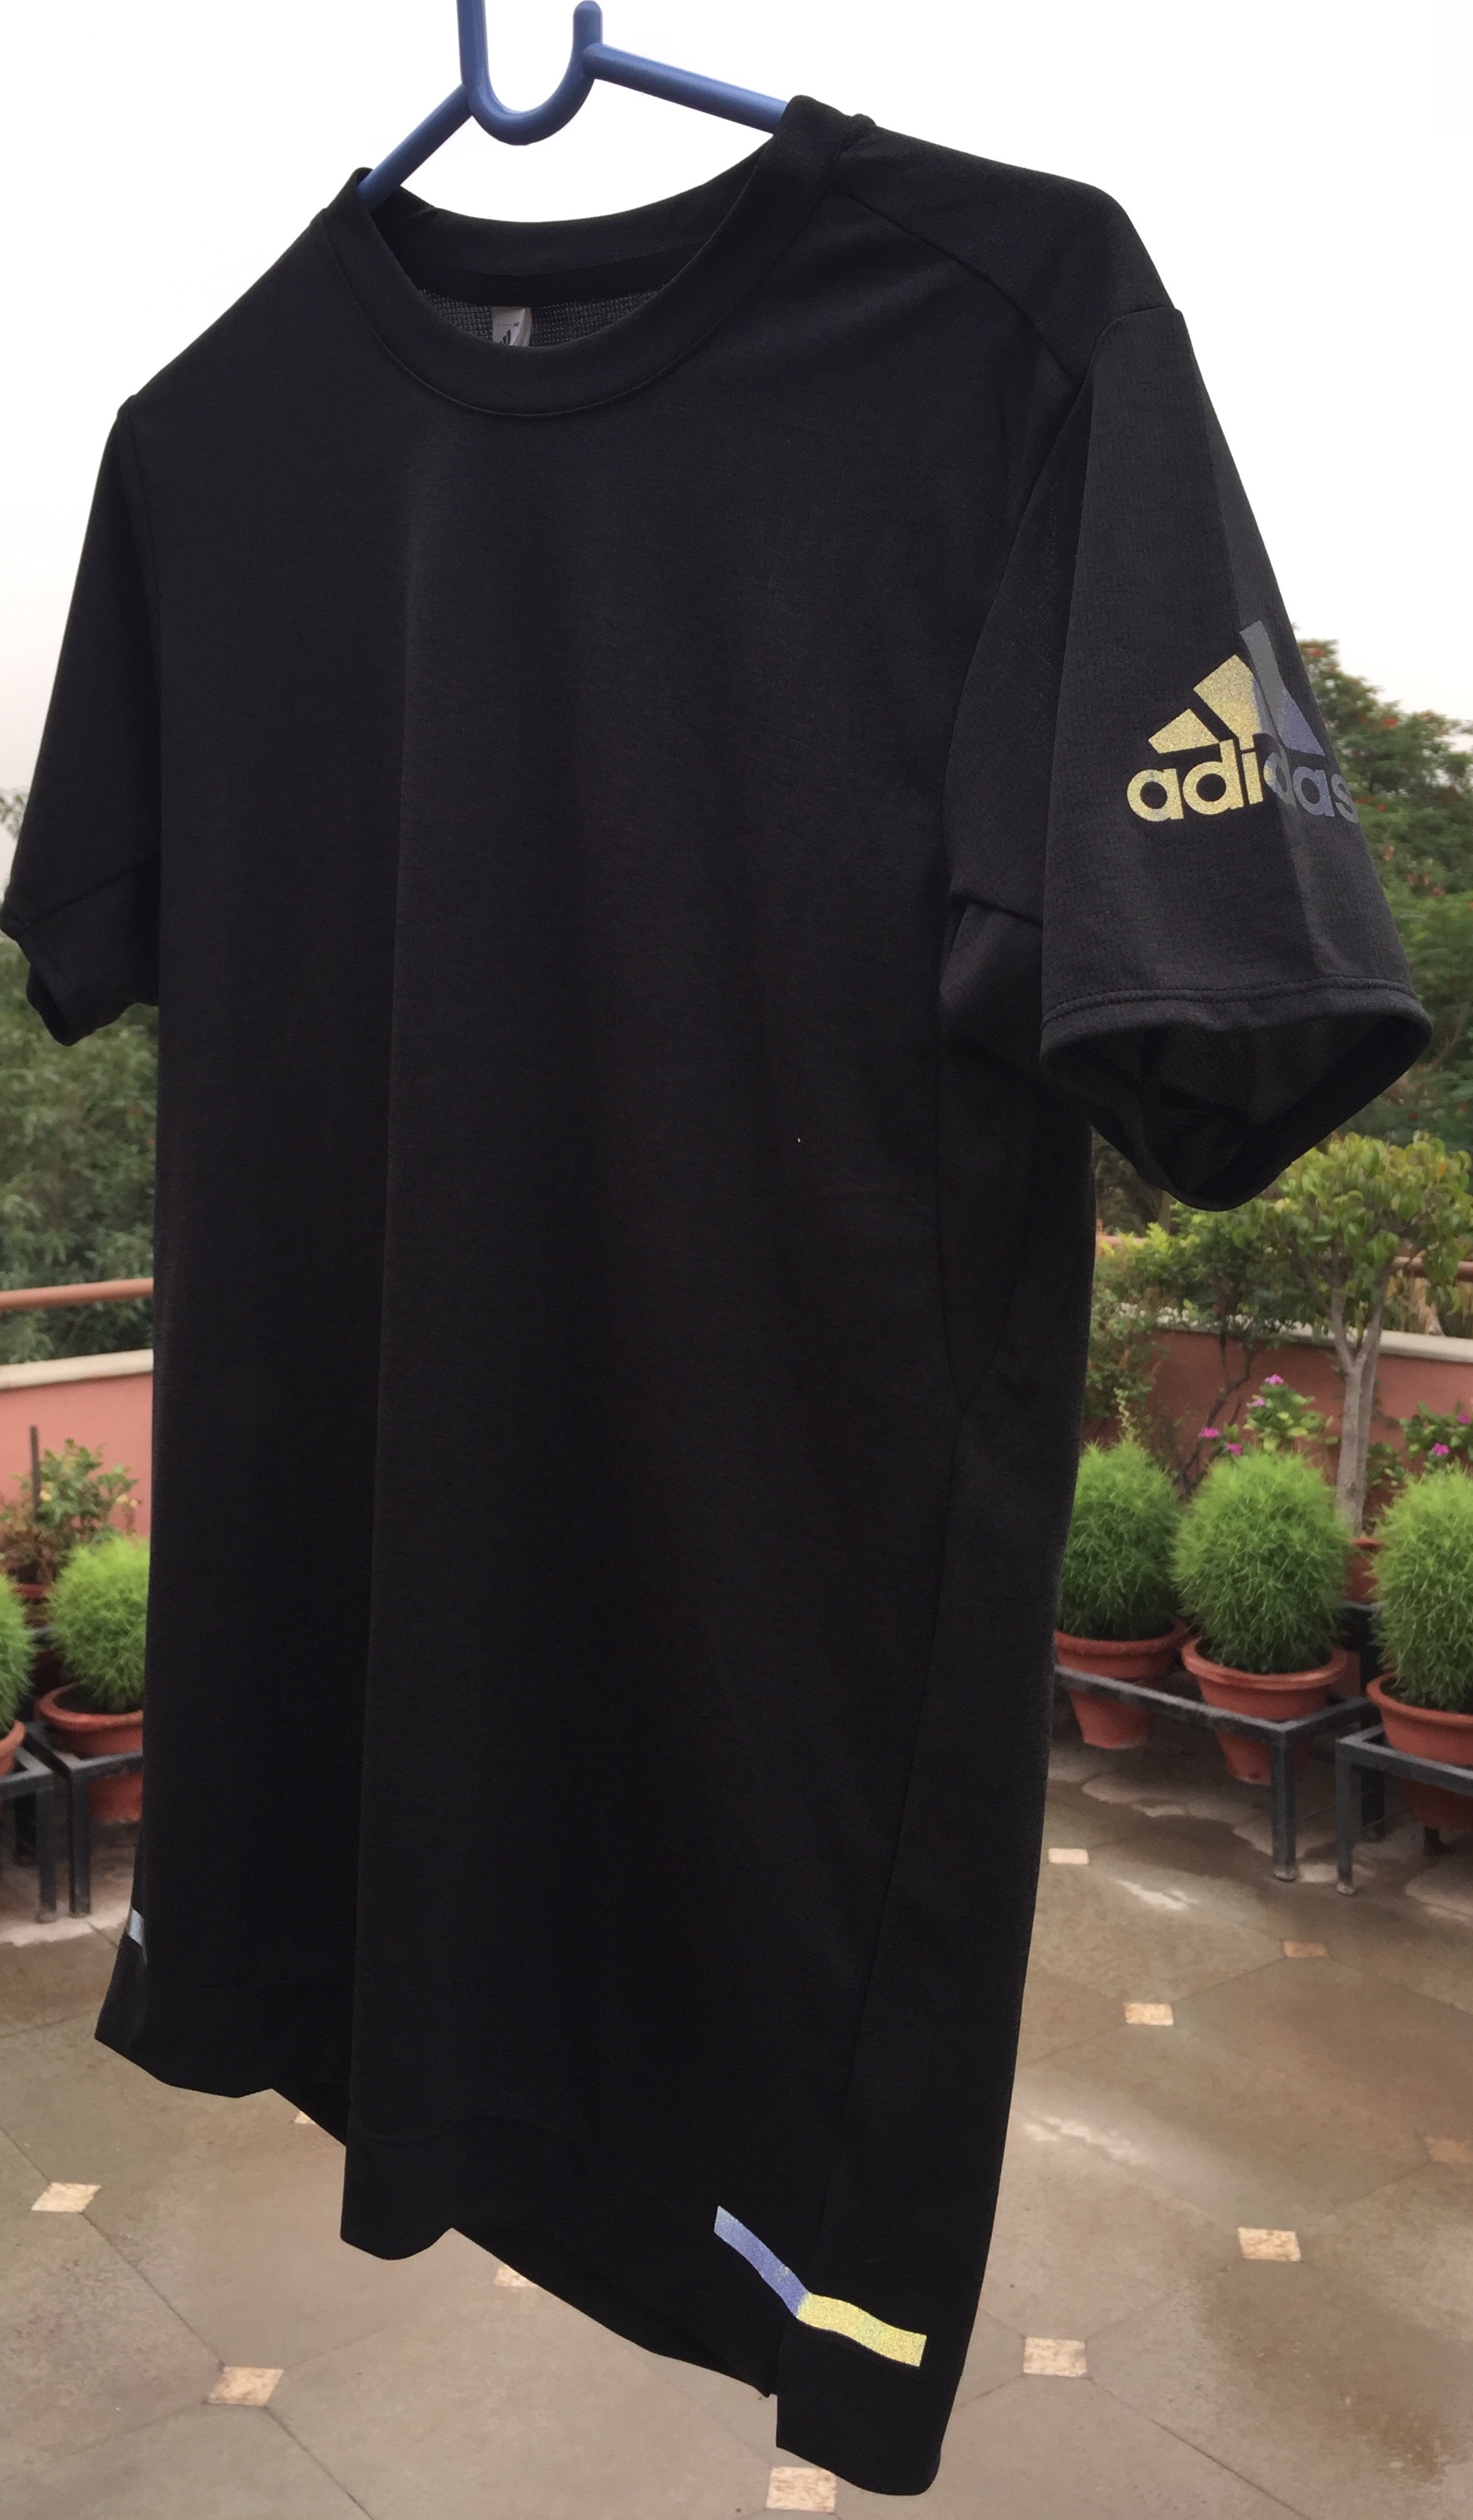 Review: FreeLift Tee ClimaChill t-shirts by adidas — Keep Miling & Smiling